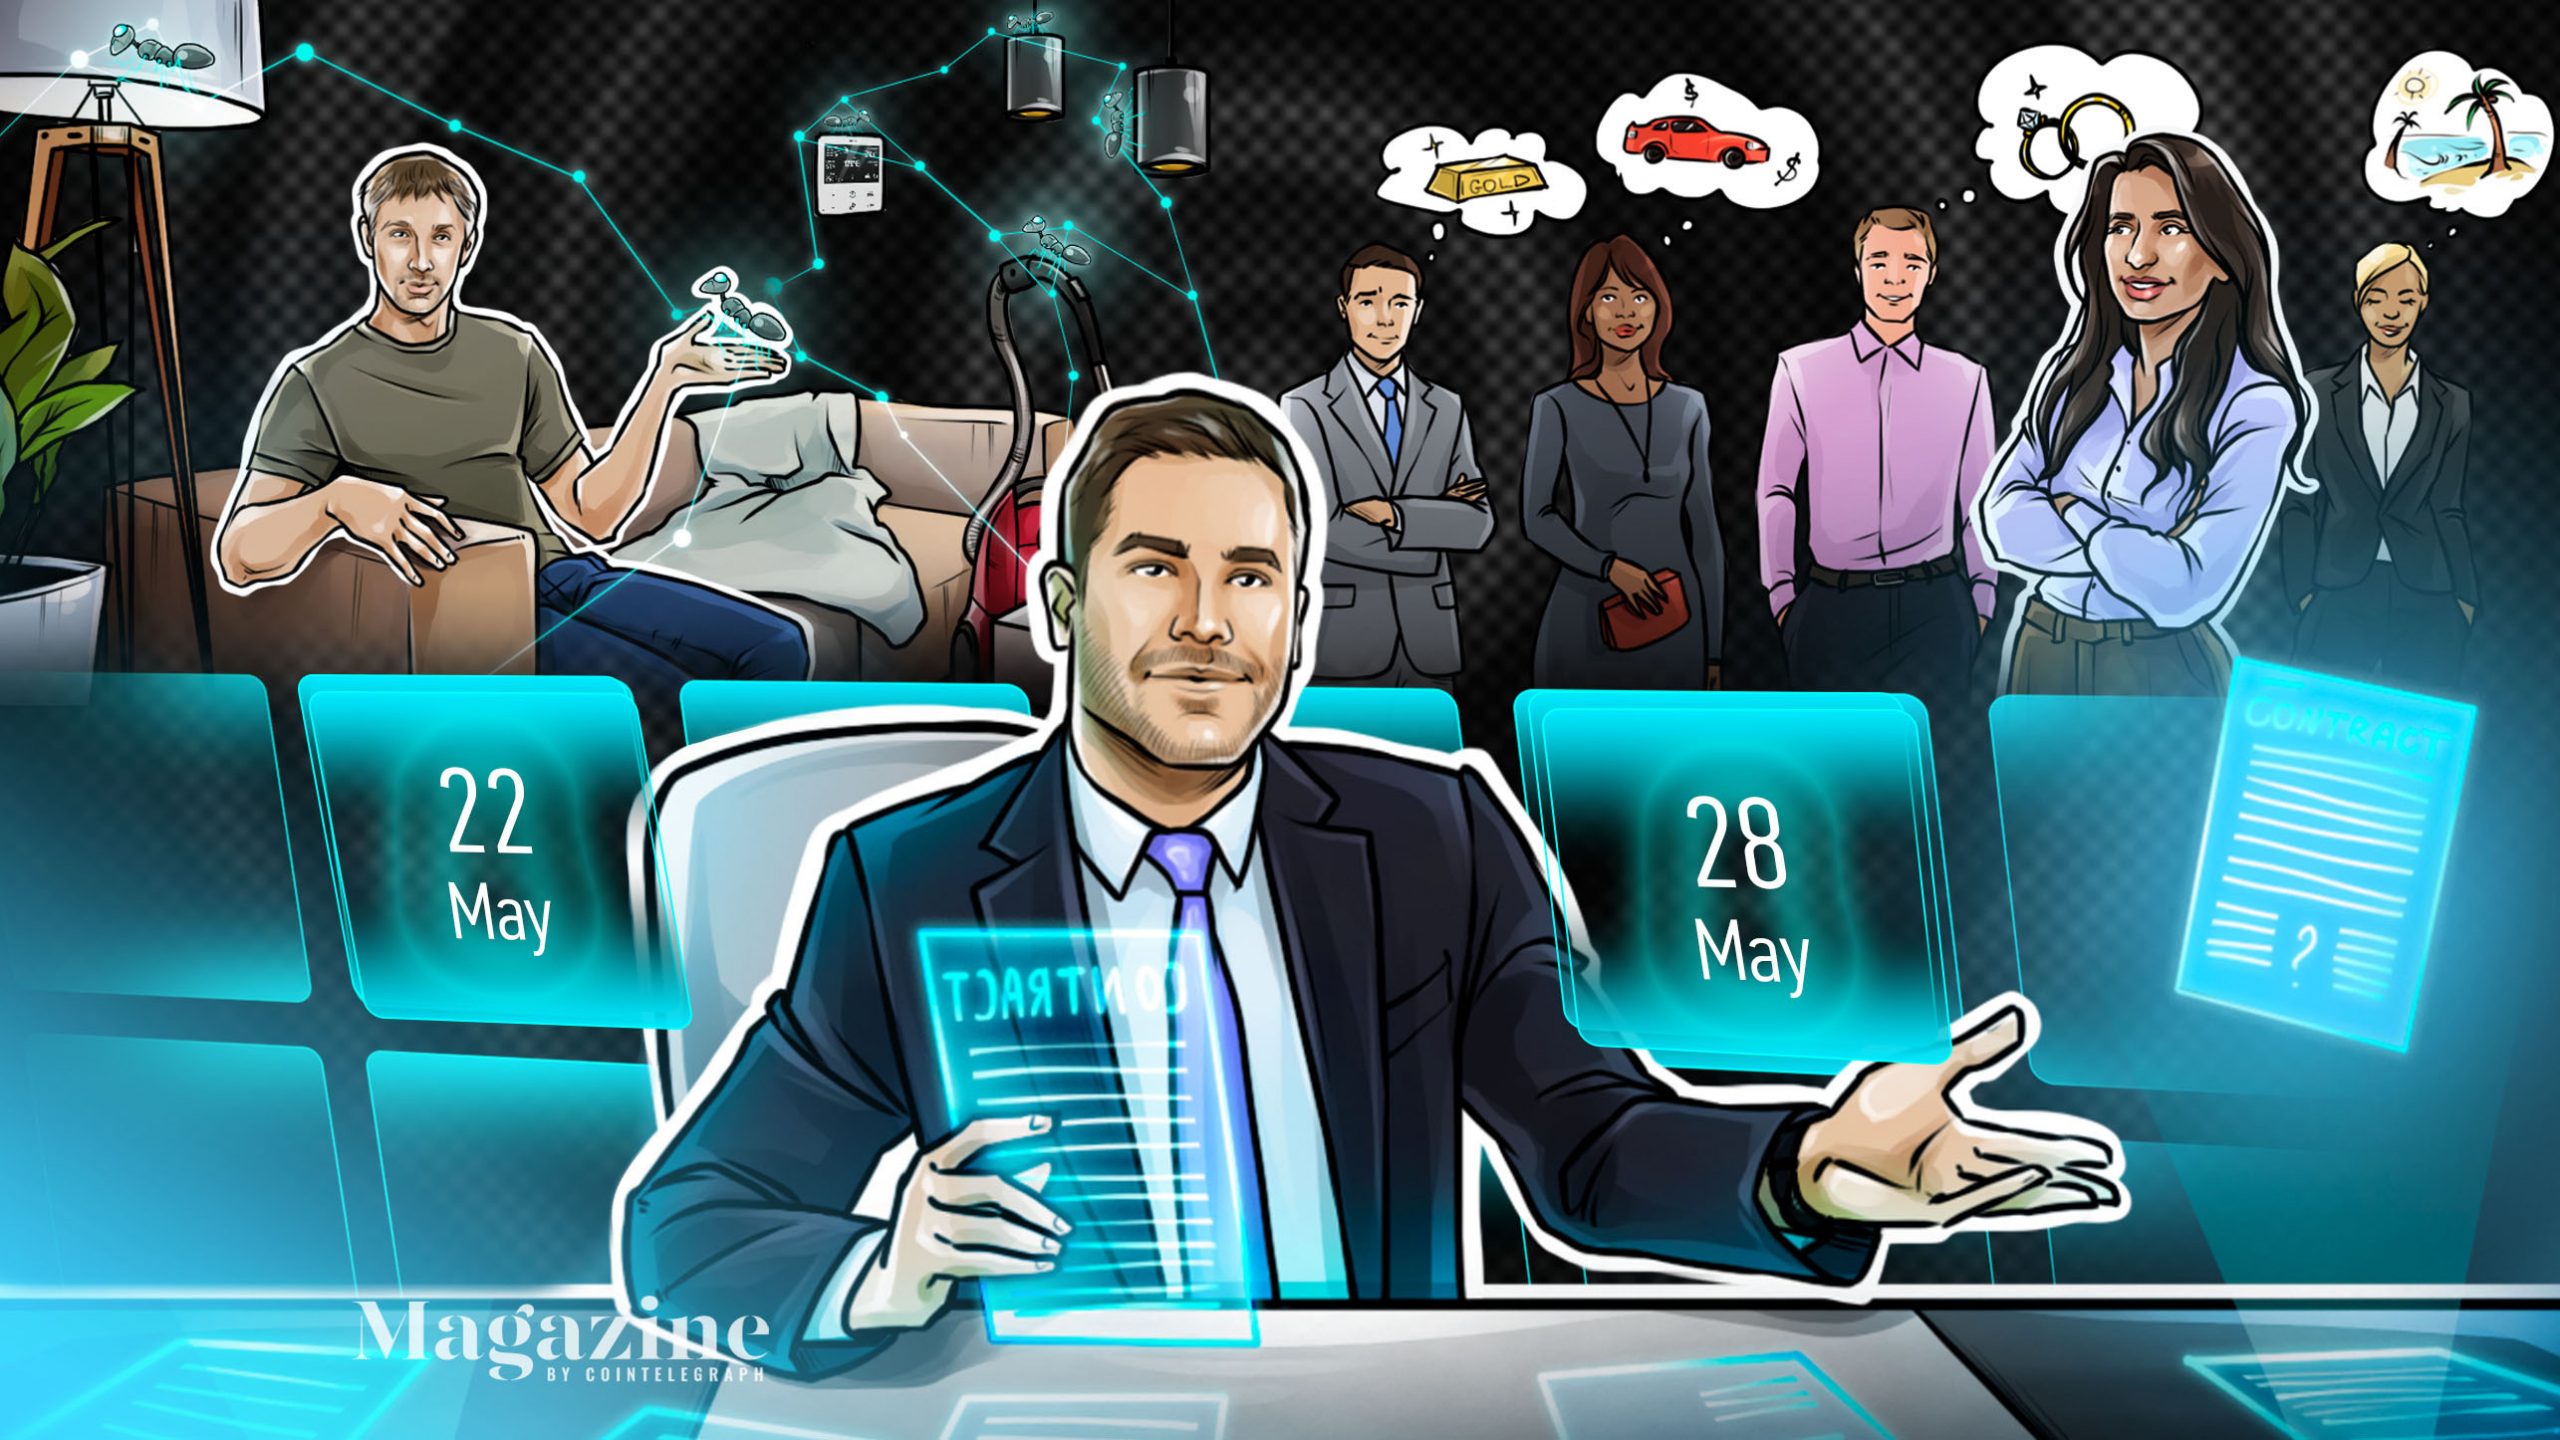 JPMorgan sees higher BTC price potential, a16z unveils $4.5 billion crypto fund, and PayPal hints at more crypto and blockchain involvement: Hodler’s Digest, May 22-28